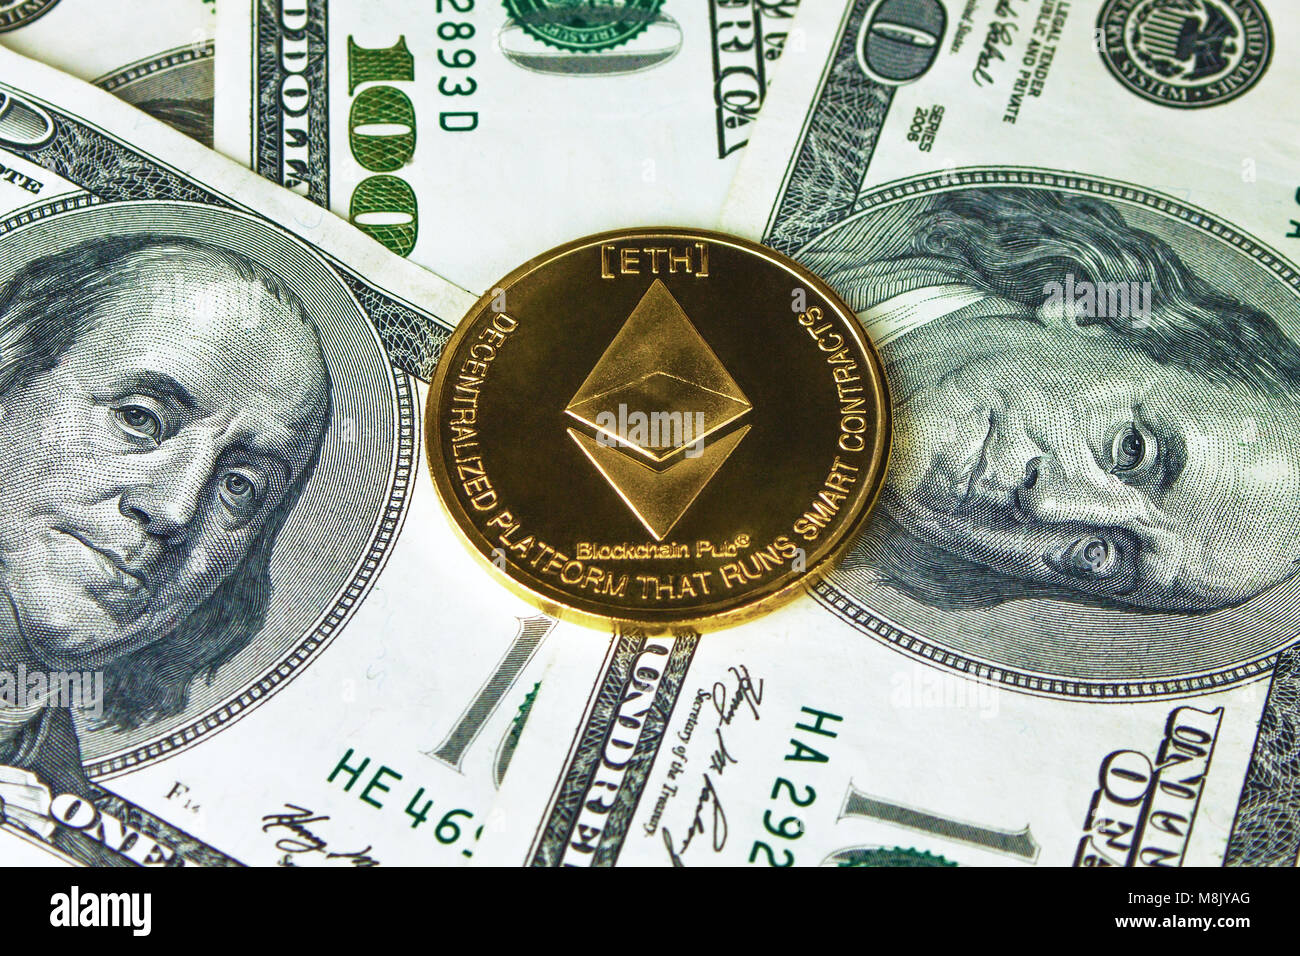 Ethereum and Callisto coins on dollar background. Stock Photo